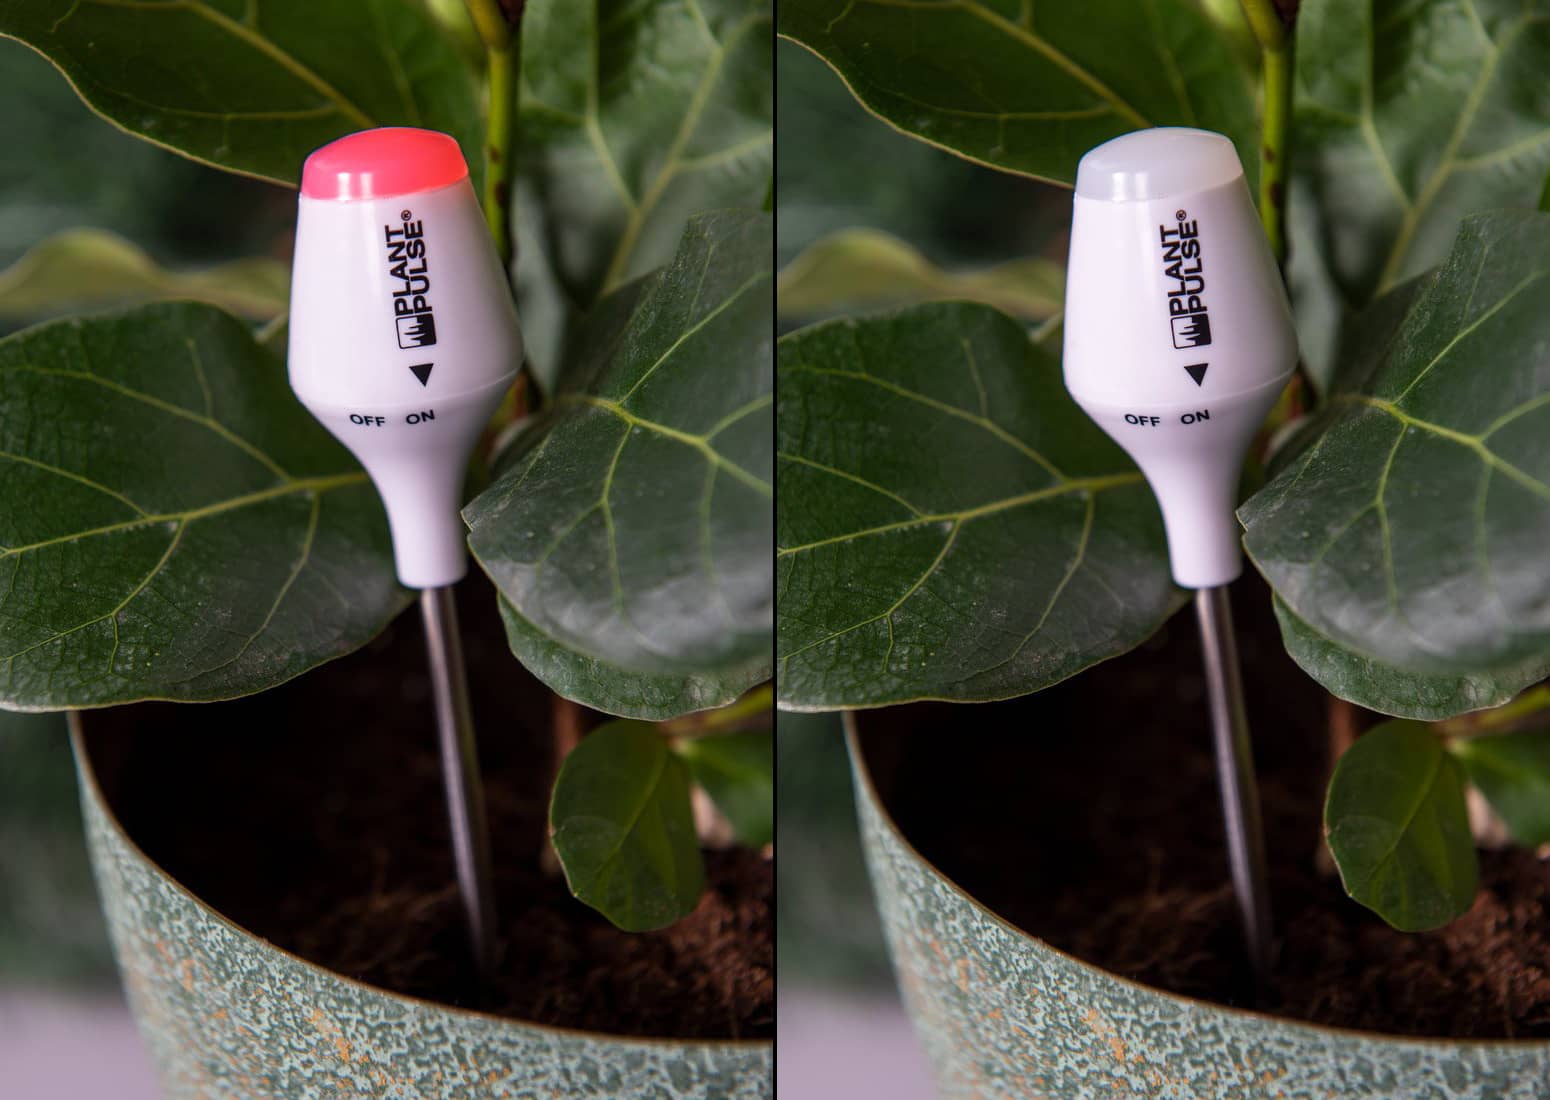 Light Up Plant Moisture Meter - Alerts When Plants are Thirsty